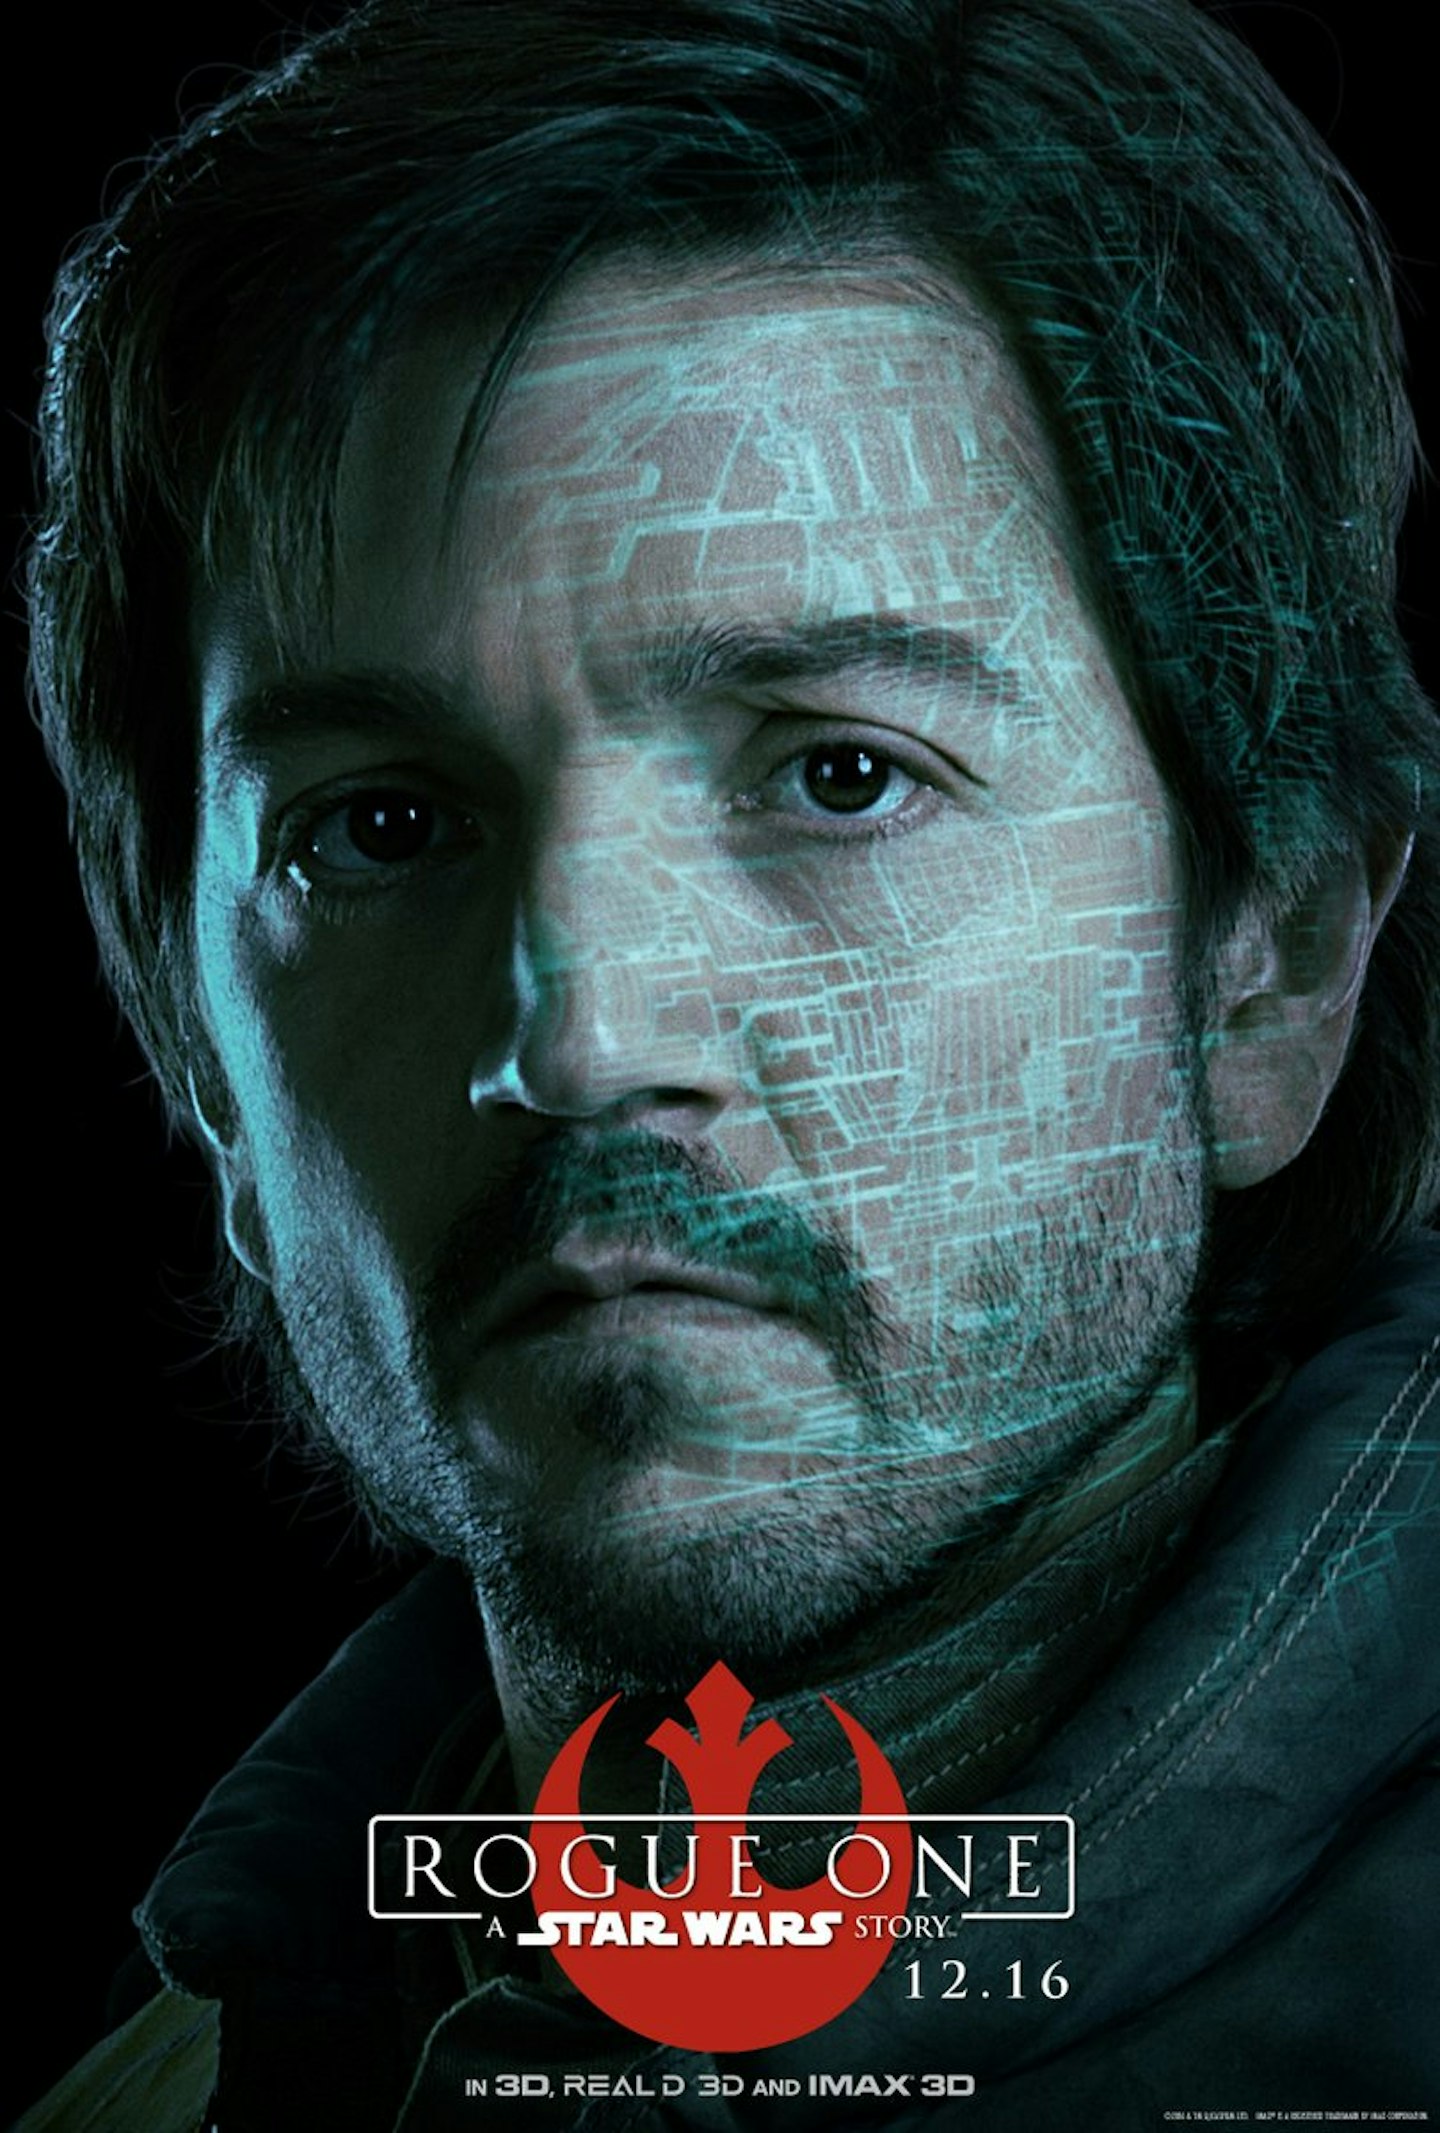 Rogue One character posters